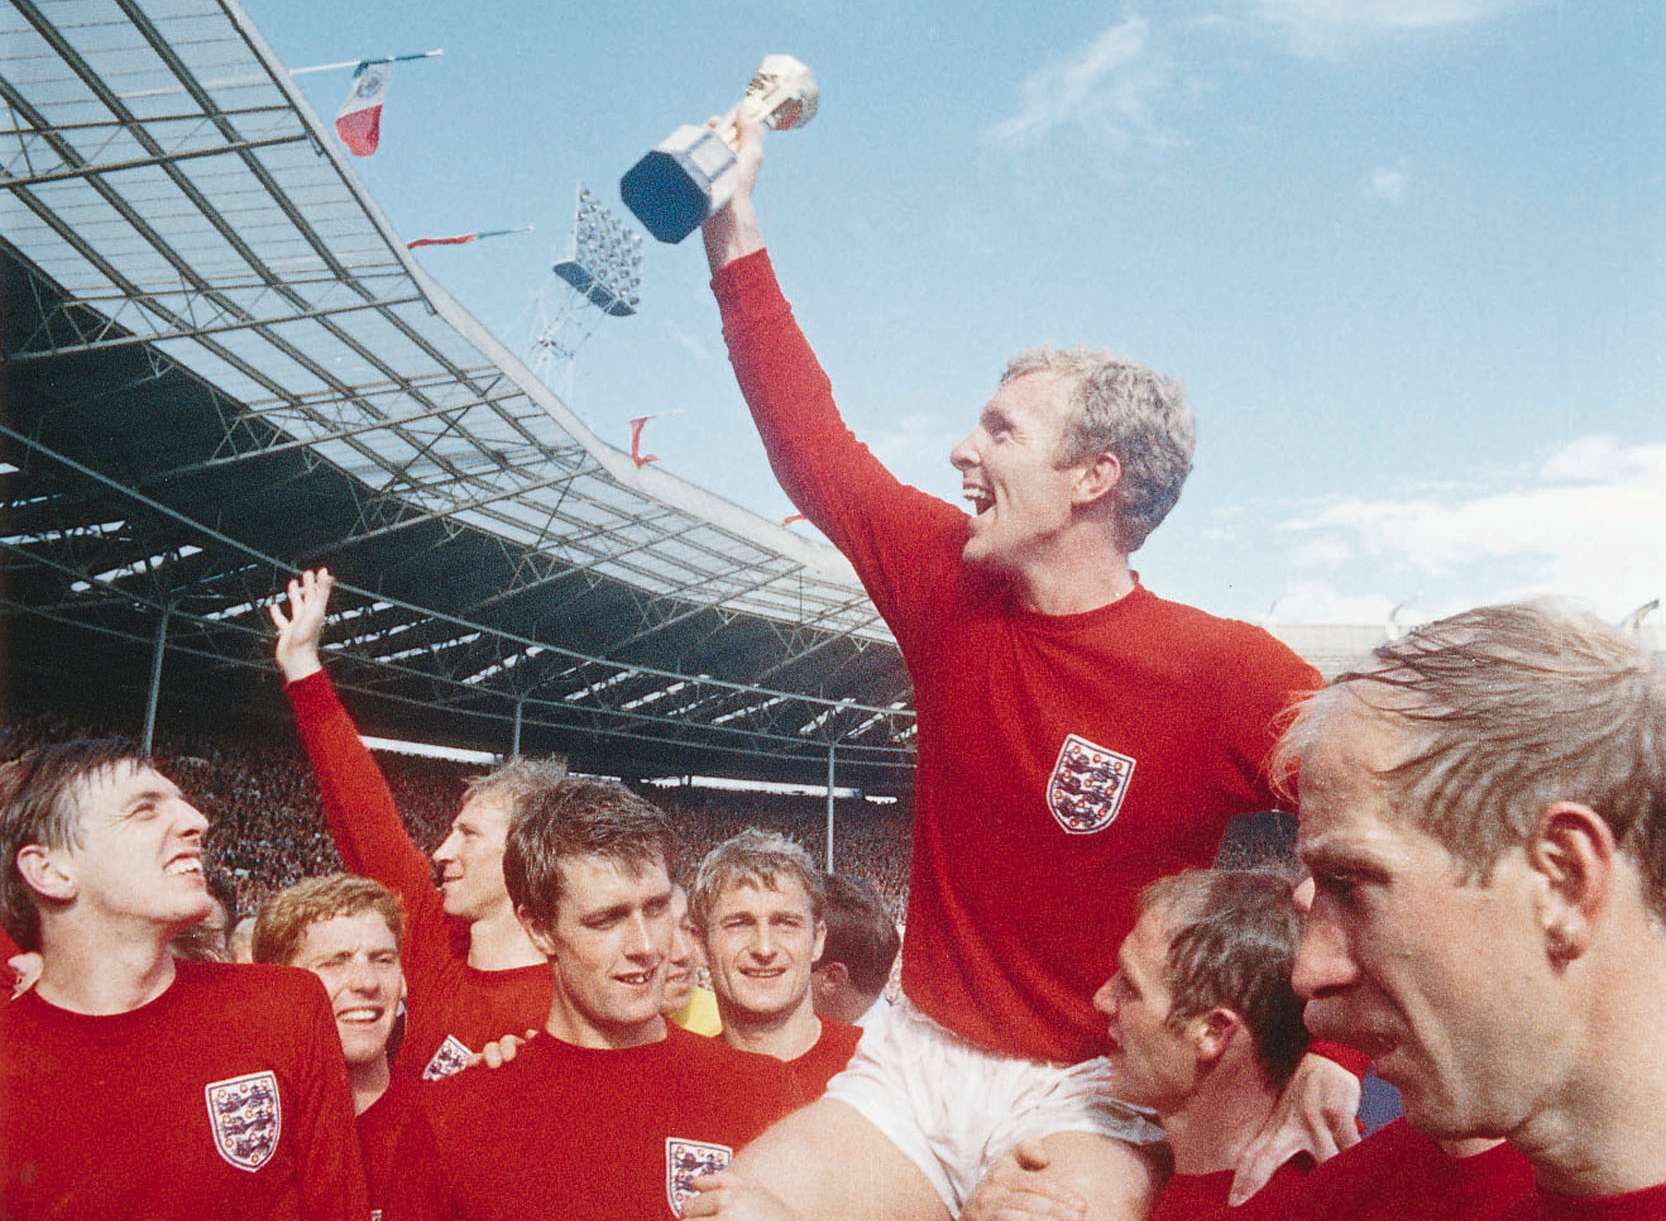 England's victory in the 1966 World Cup Final